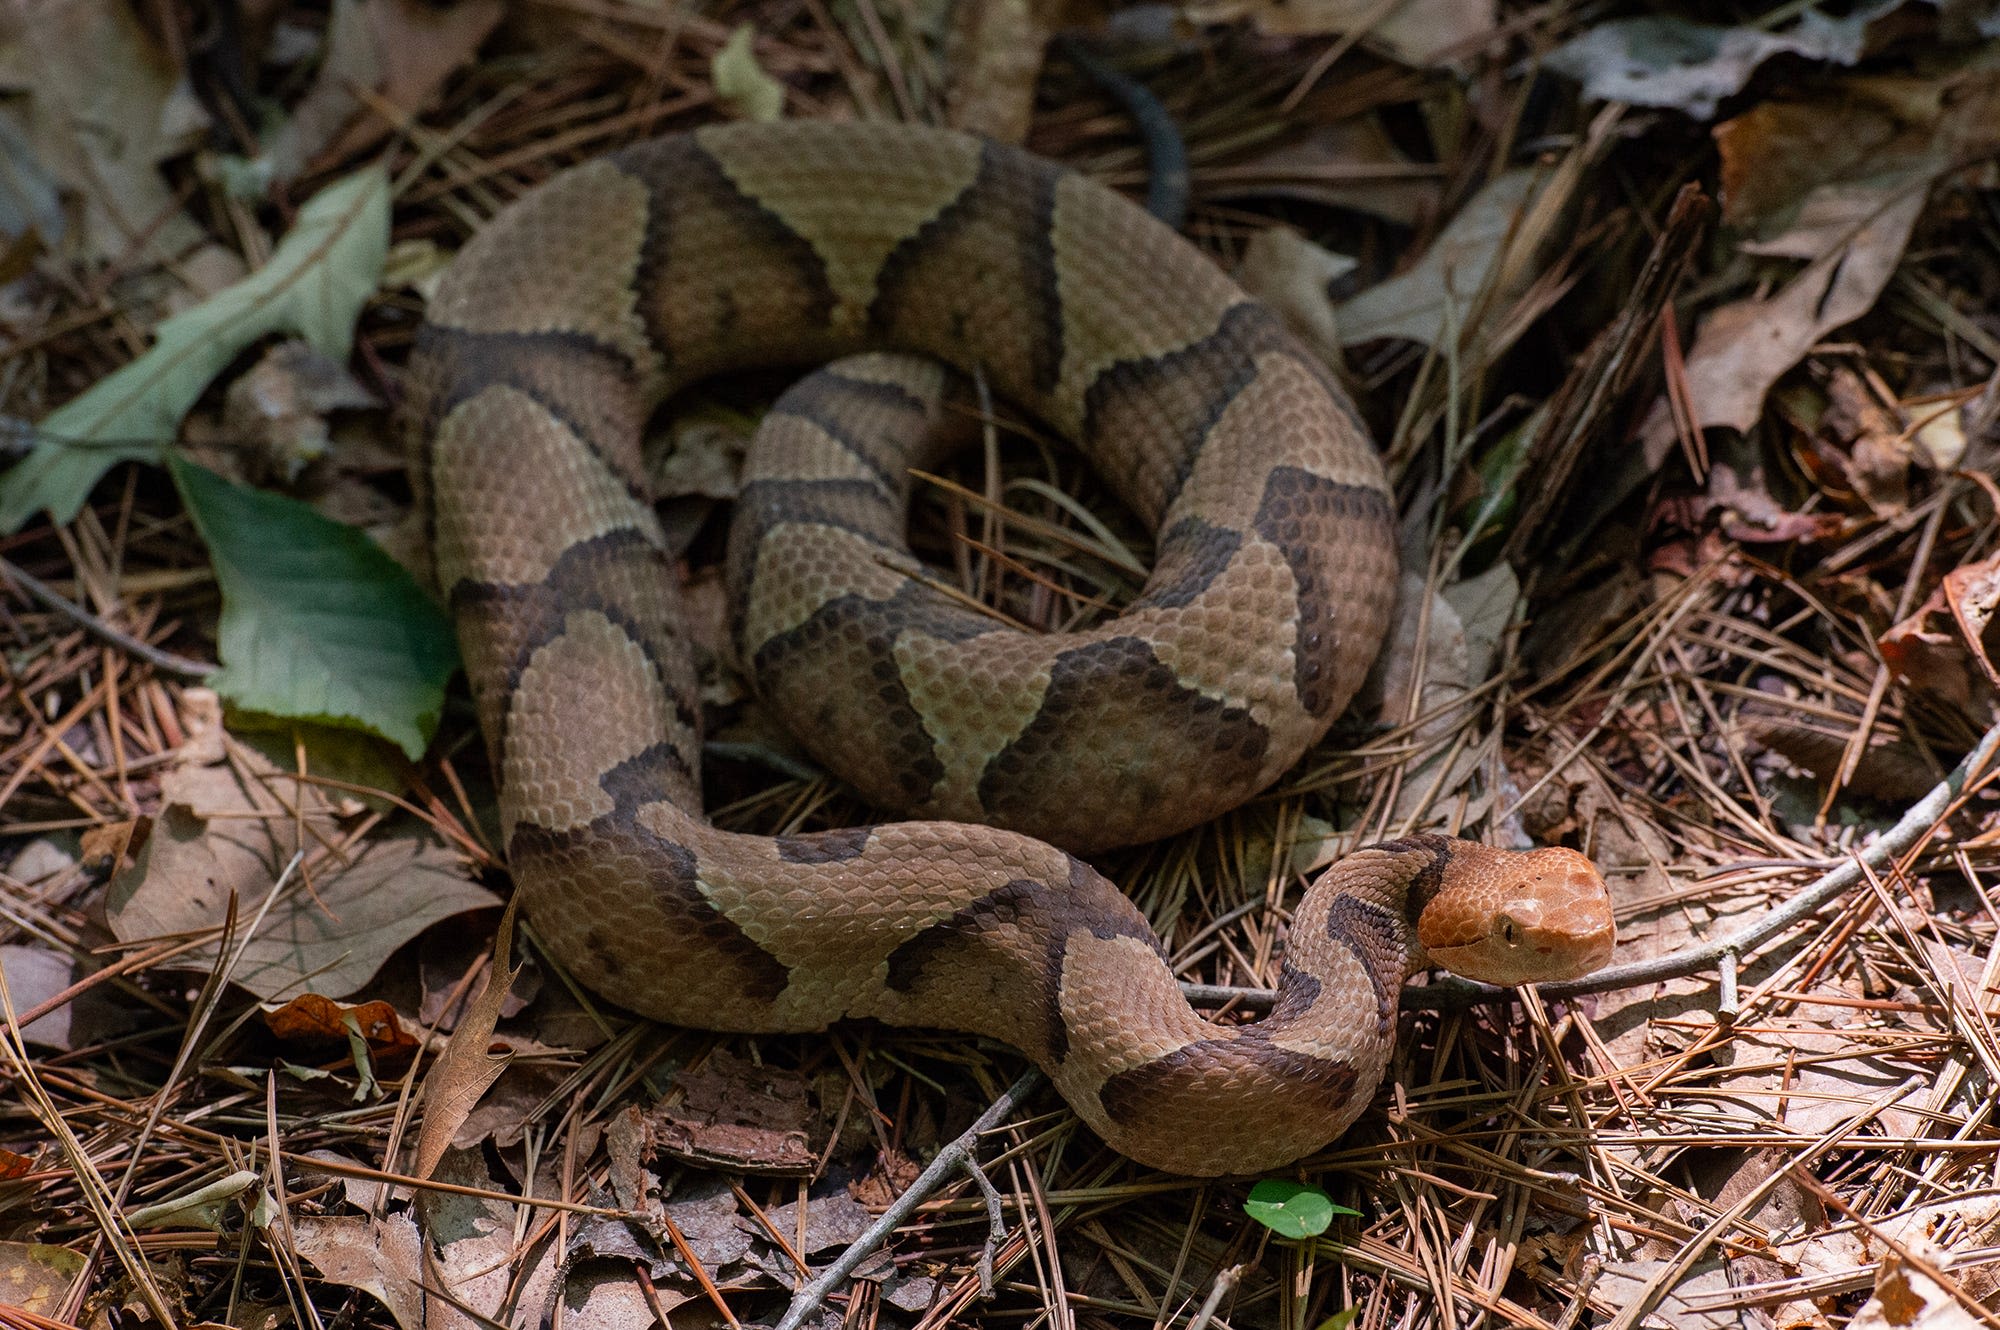 Six venomous snakes in South Carolina: What to know about rattlesnakes, copperheads, more